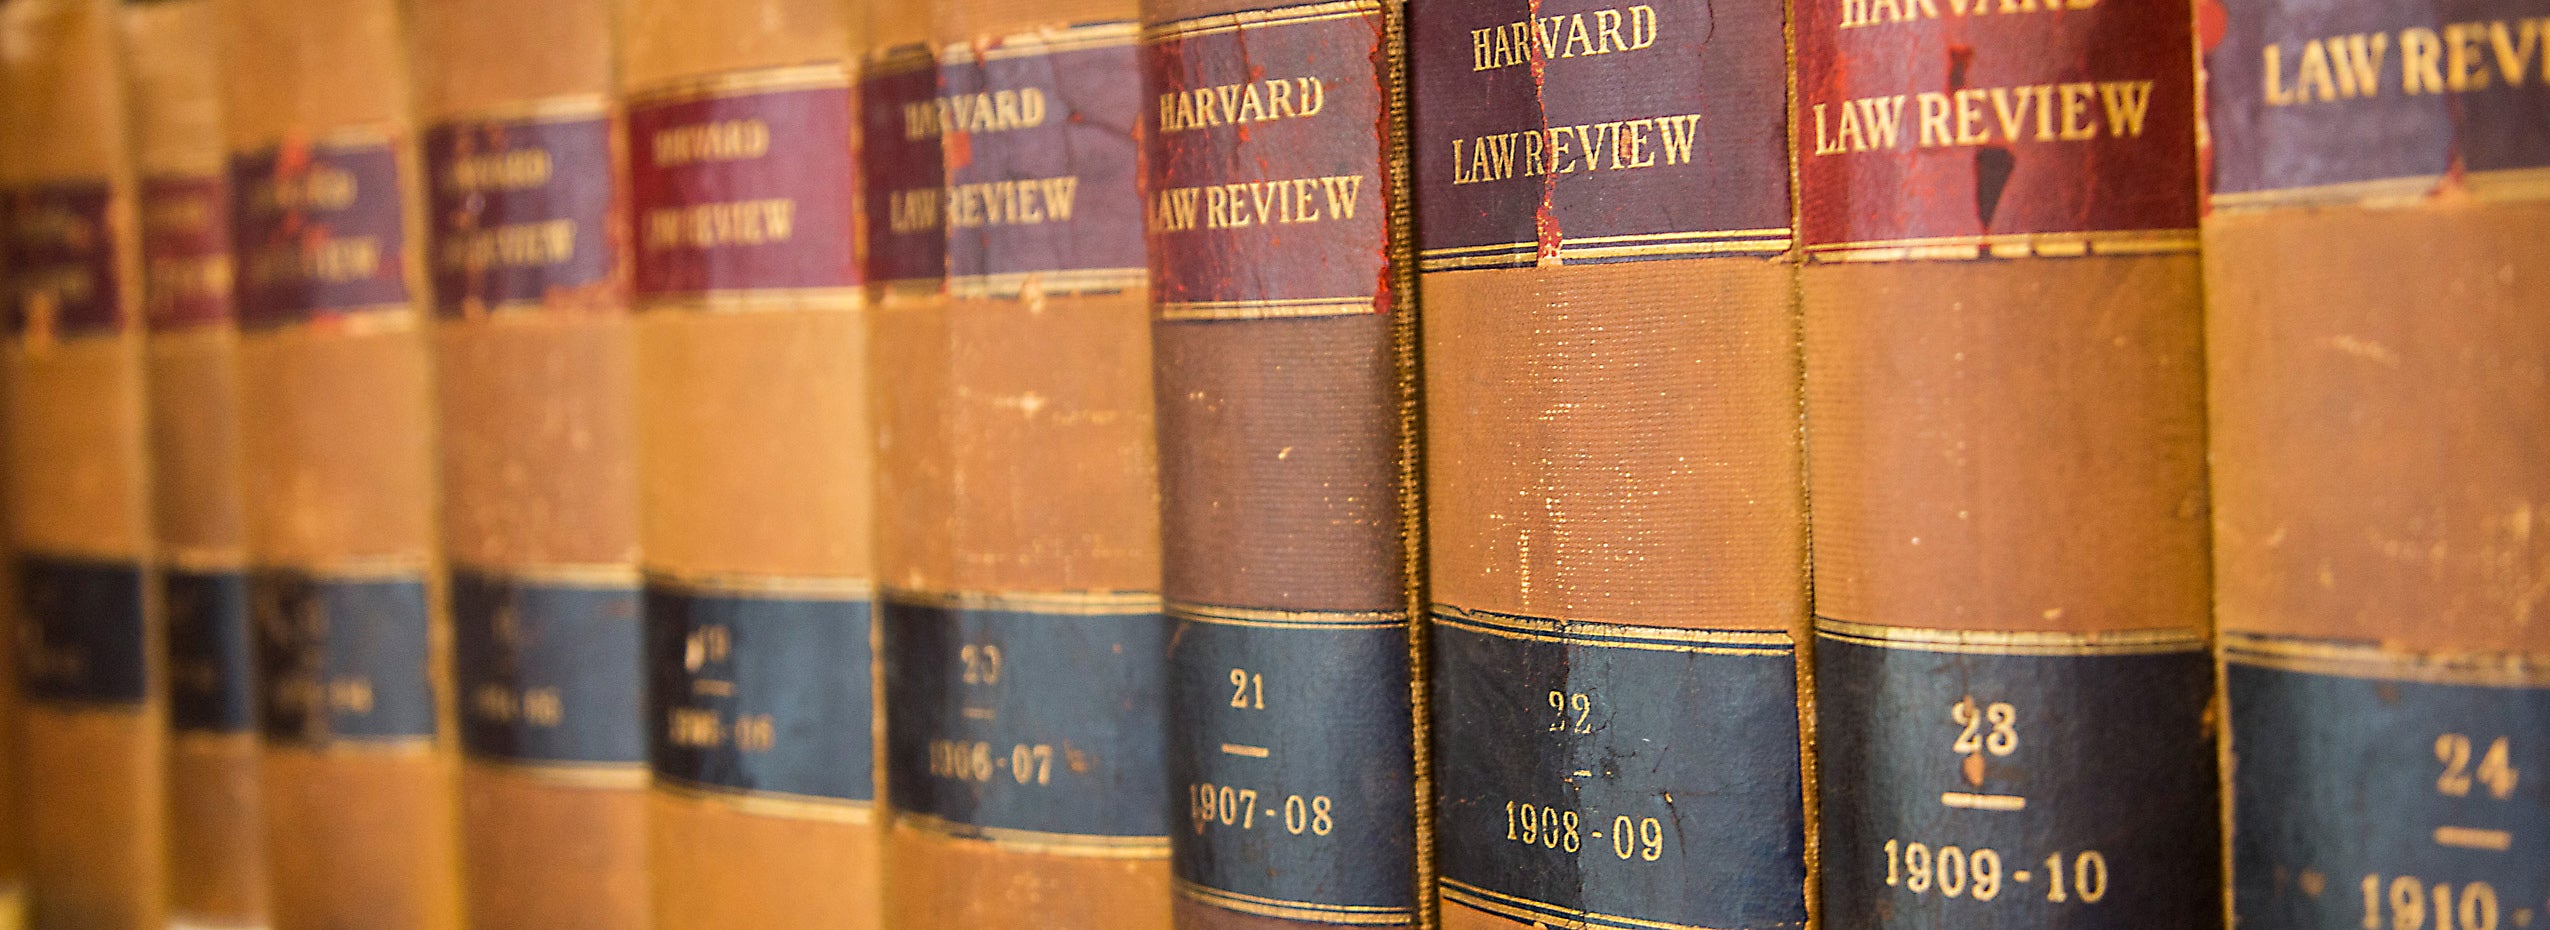 Harvard Law Review releases special bicentennial edition 6